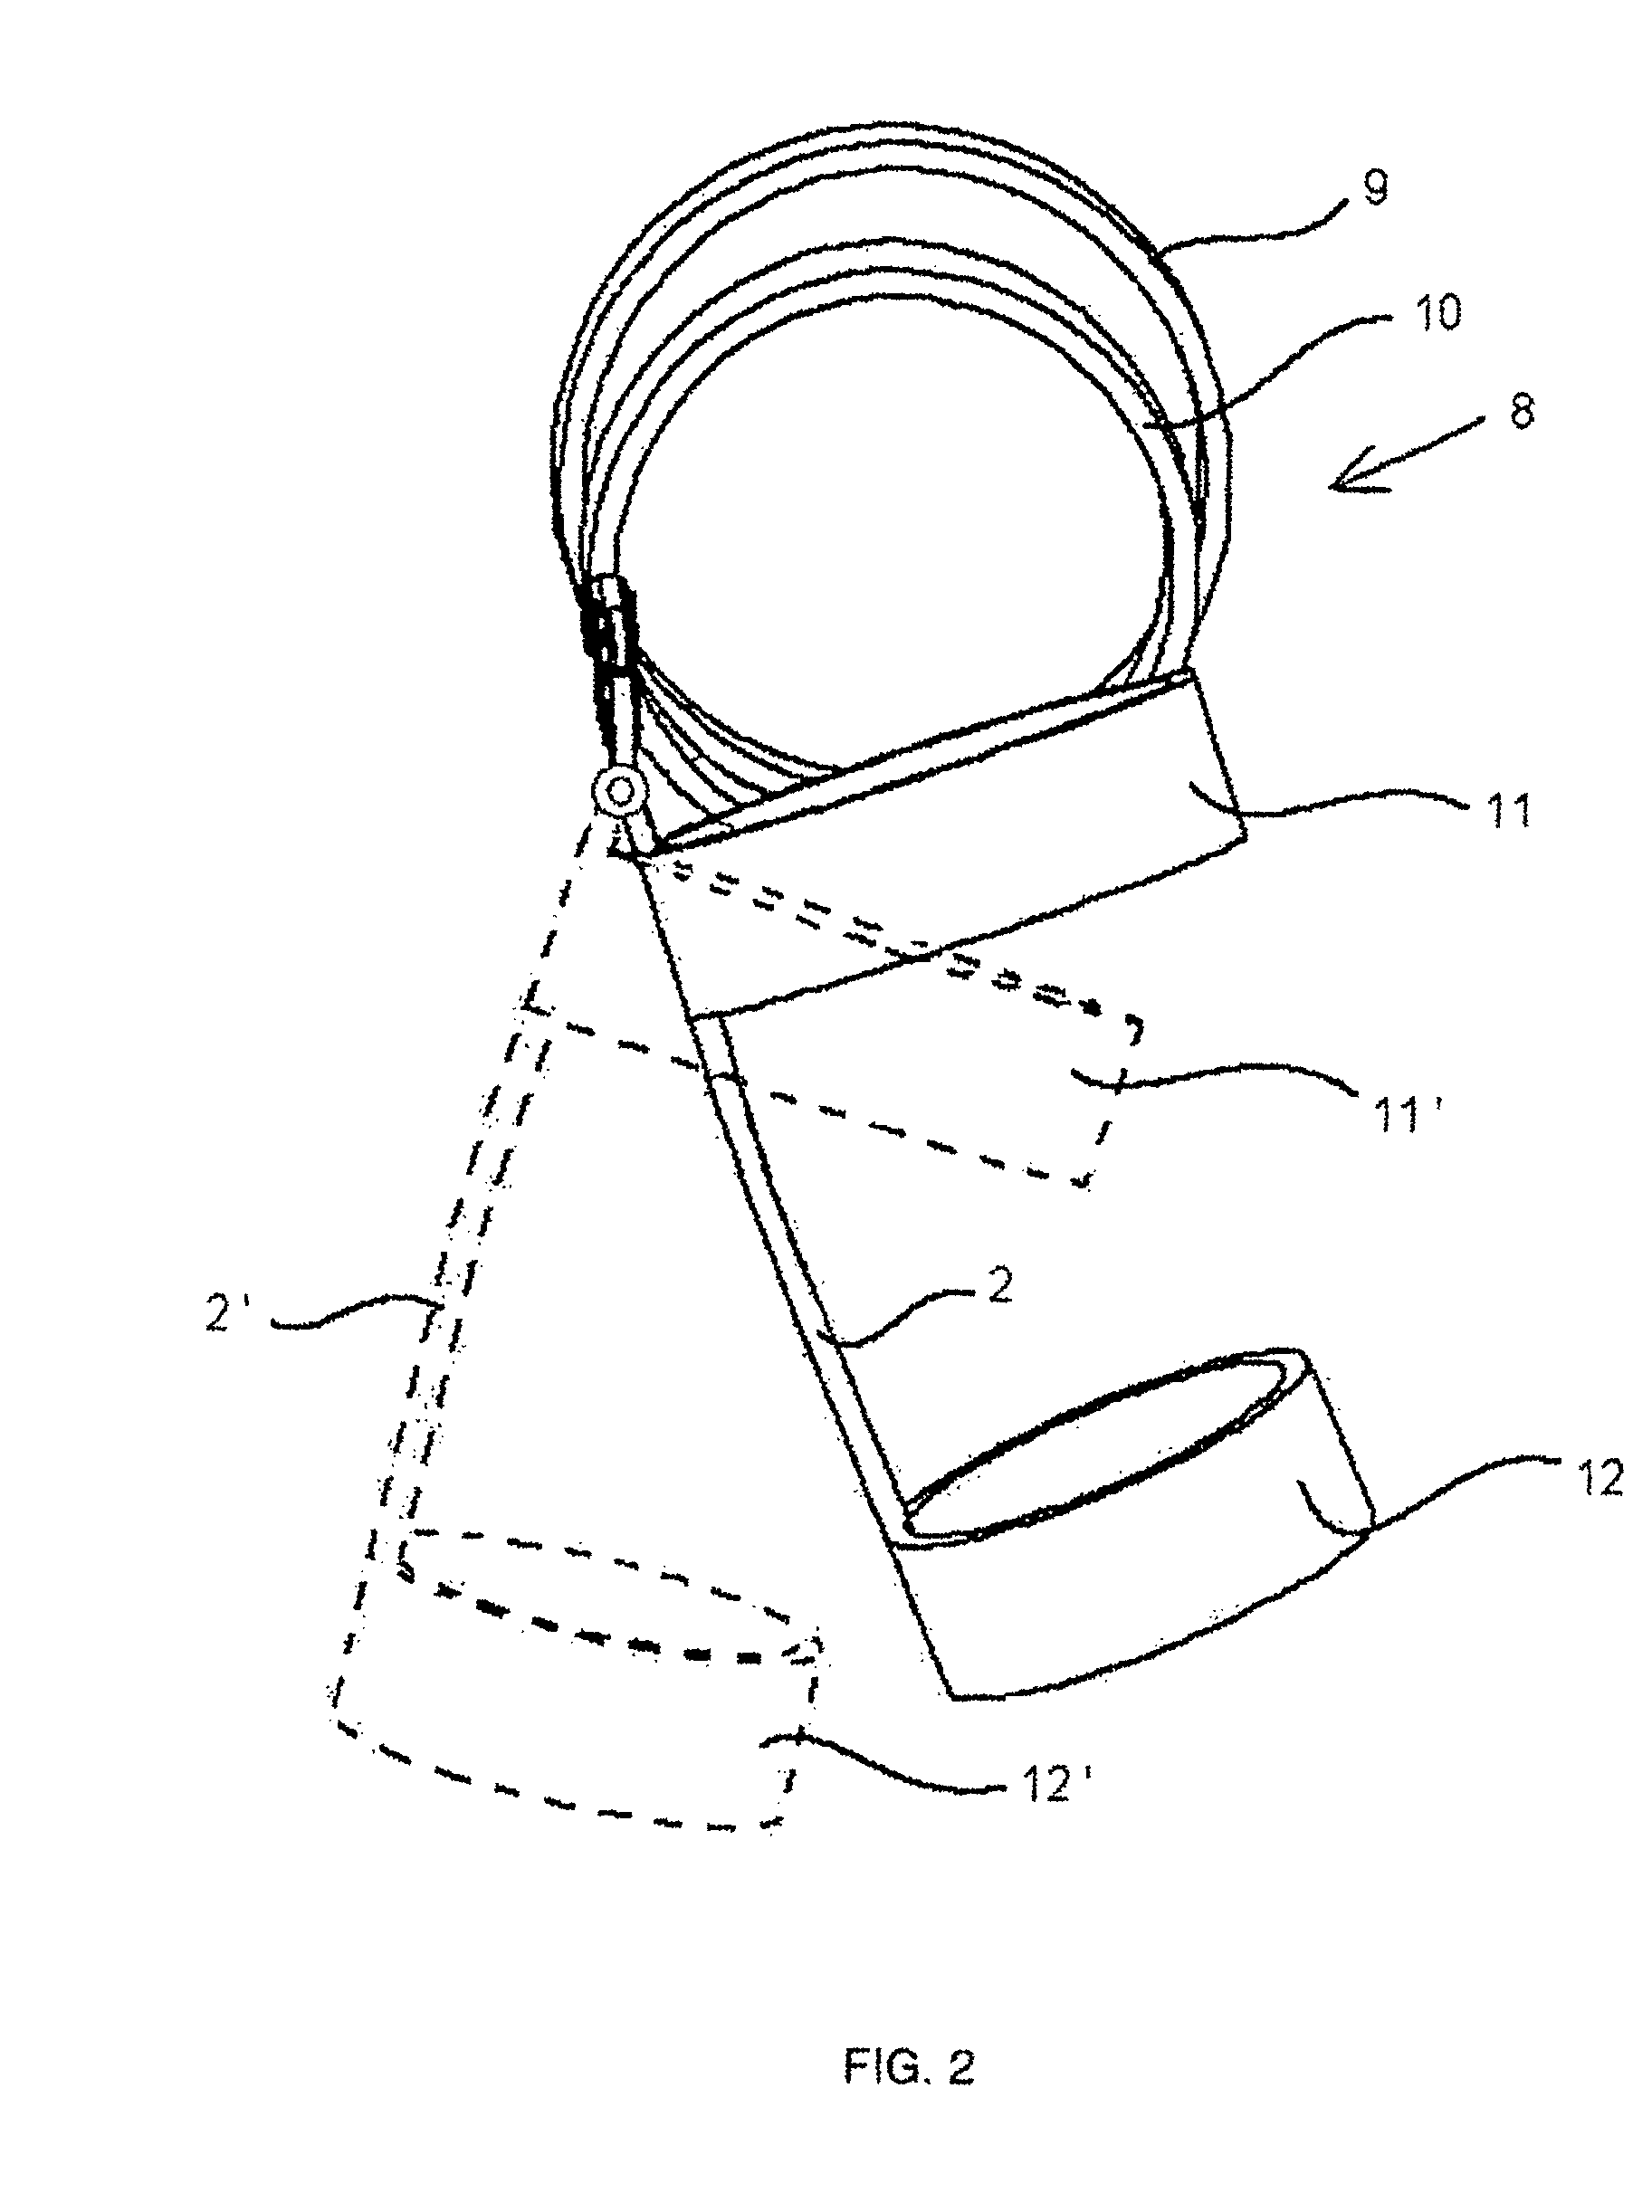 Orthosis with multiple hinges